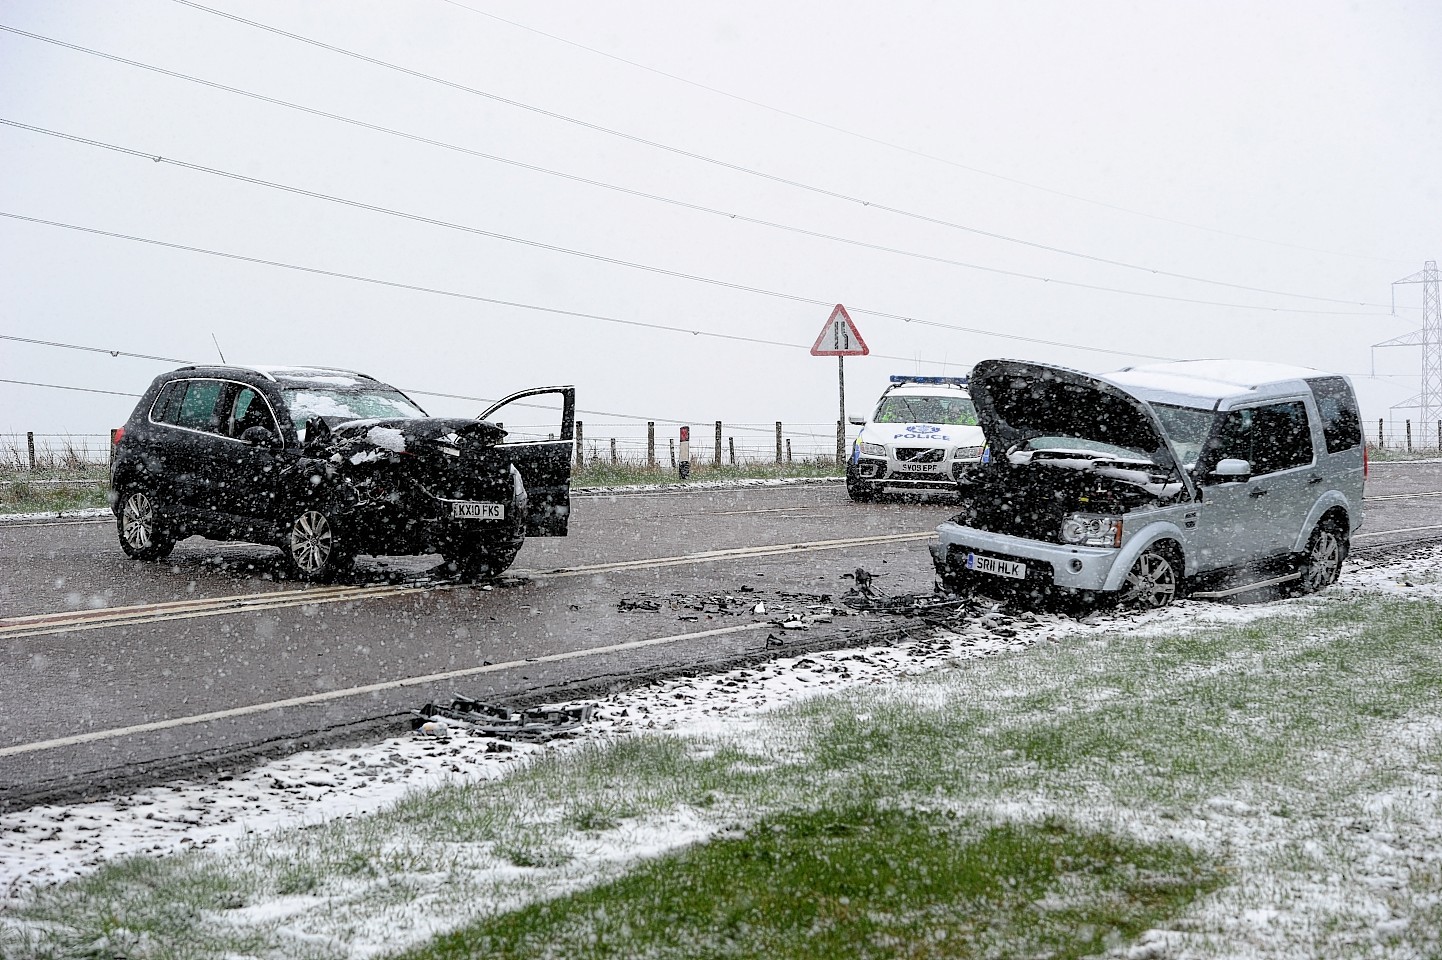 Snow fall at the scene of the accident on the A96. Credit: Kenny Elrick.